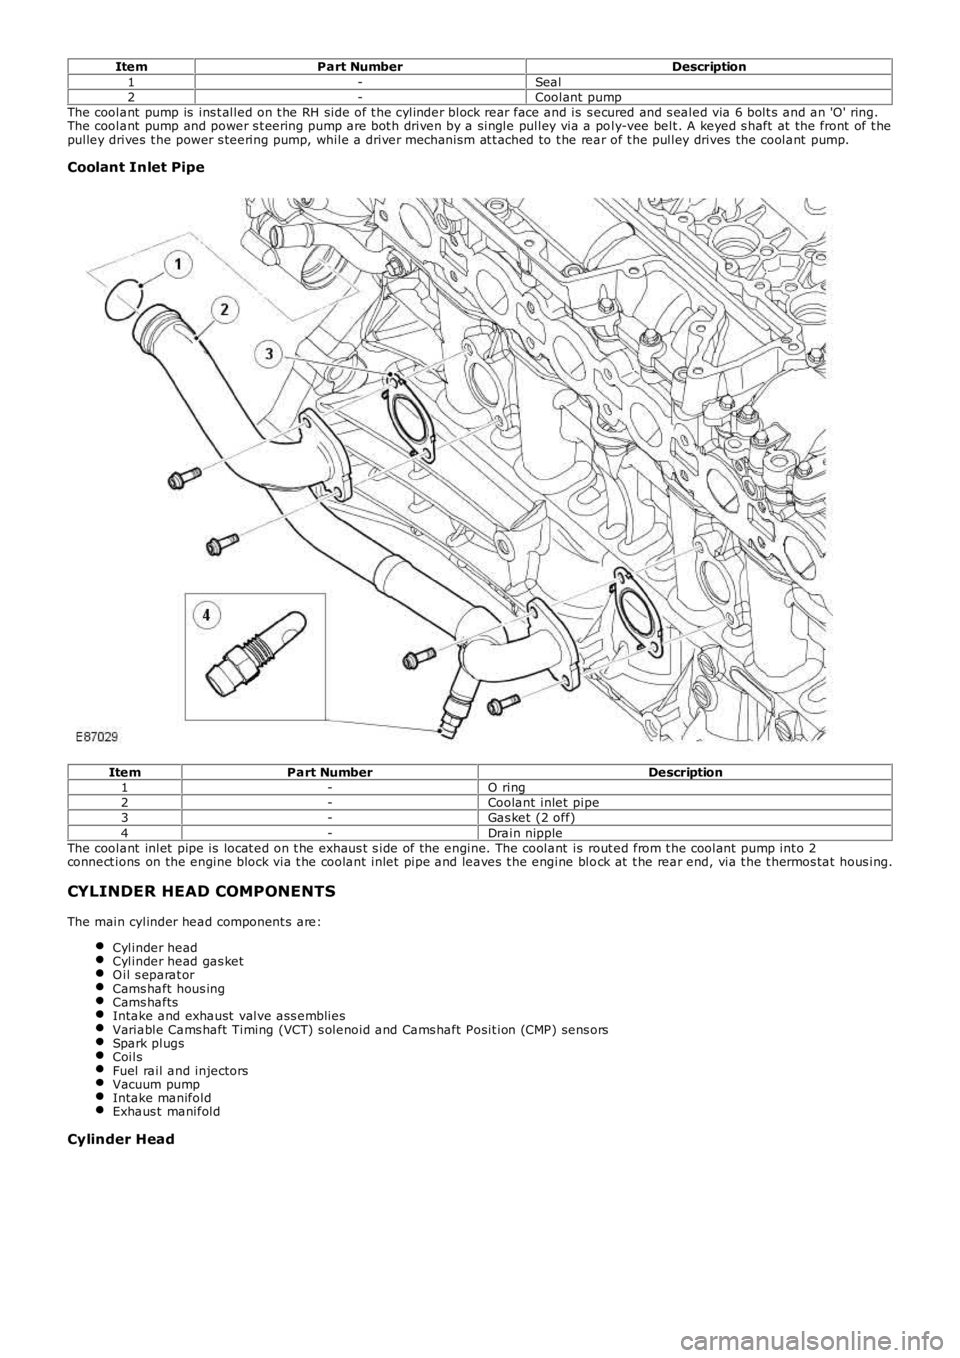 LAND ROVER FRELANDER 2 2006  Repair Manual ItemPart NumberDescription1-Seal2-Coolant  pumpThe coolant  pump is  ins t alled on t he RH side of t he cylinder block rear face and is s ecured and s ealed via 6 bolt s  and an 'O' ring.The 